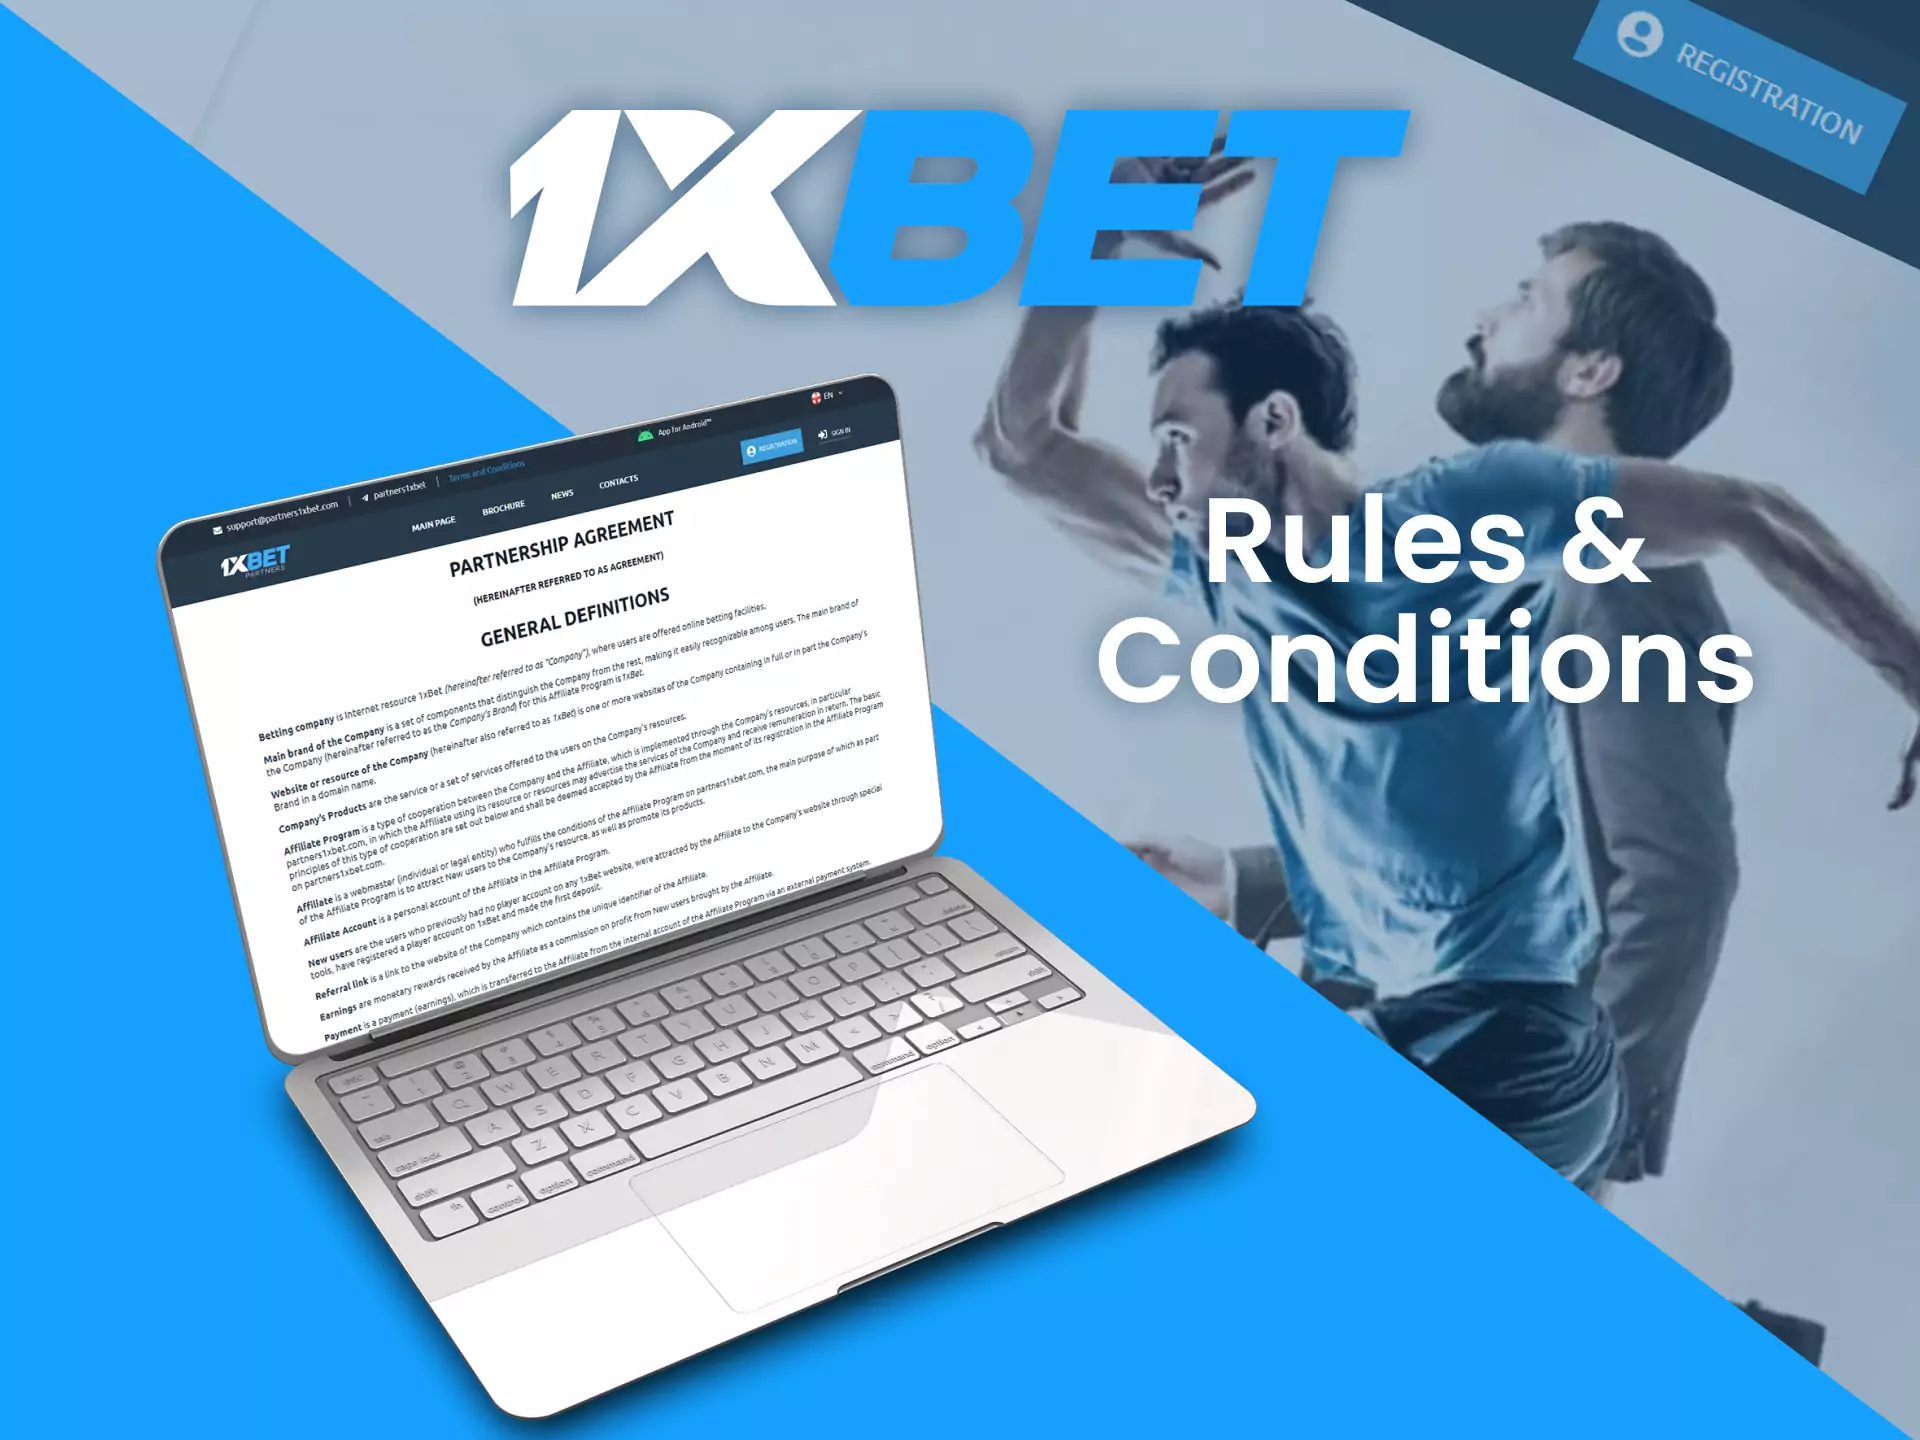 Follow the rules of the 1xbet affiliate program not to be banned by the platform.